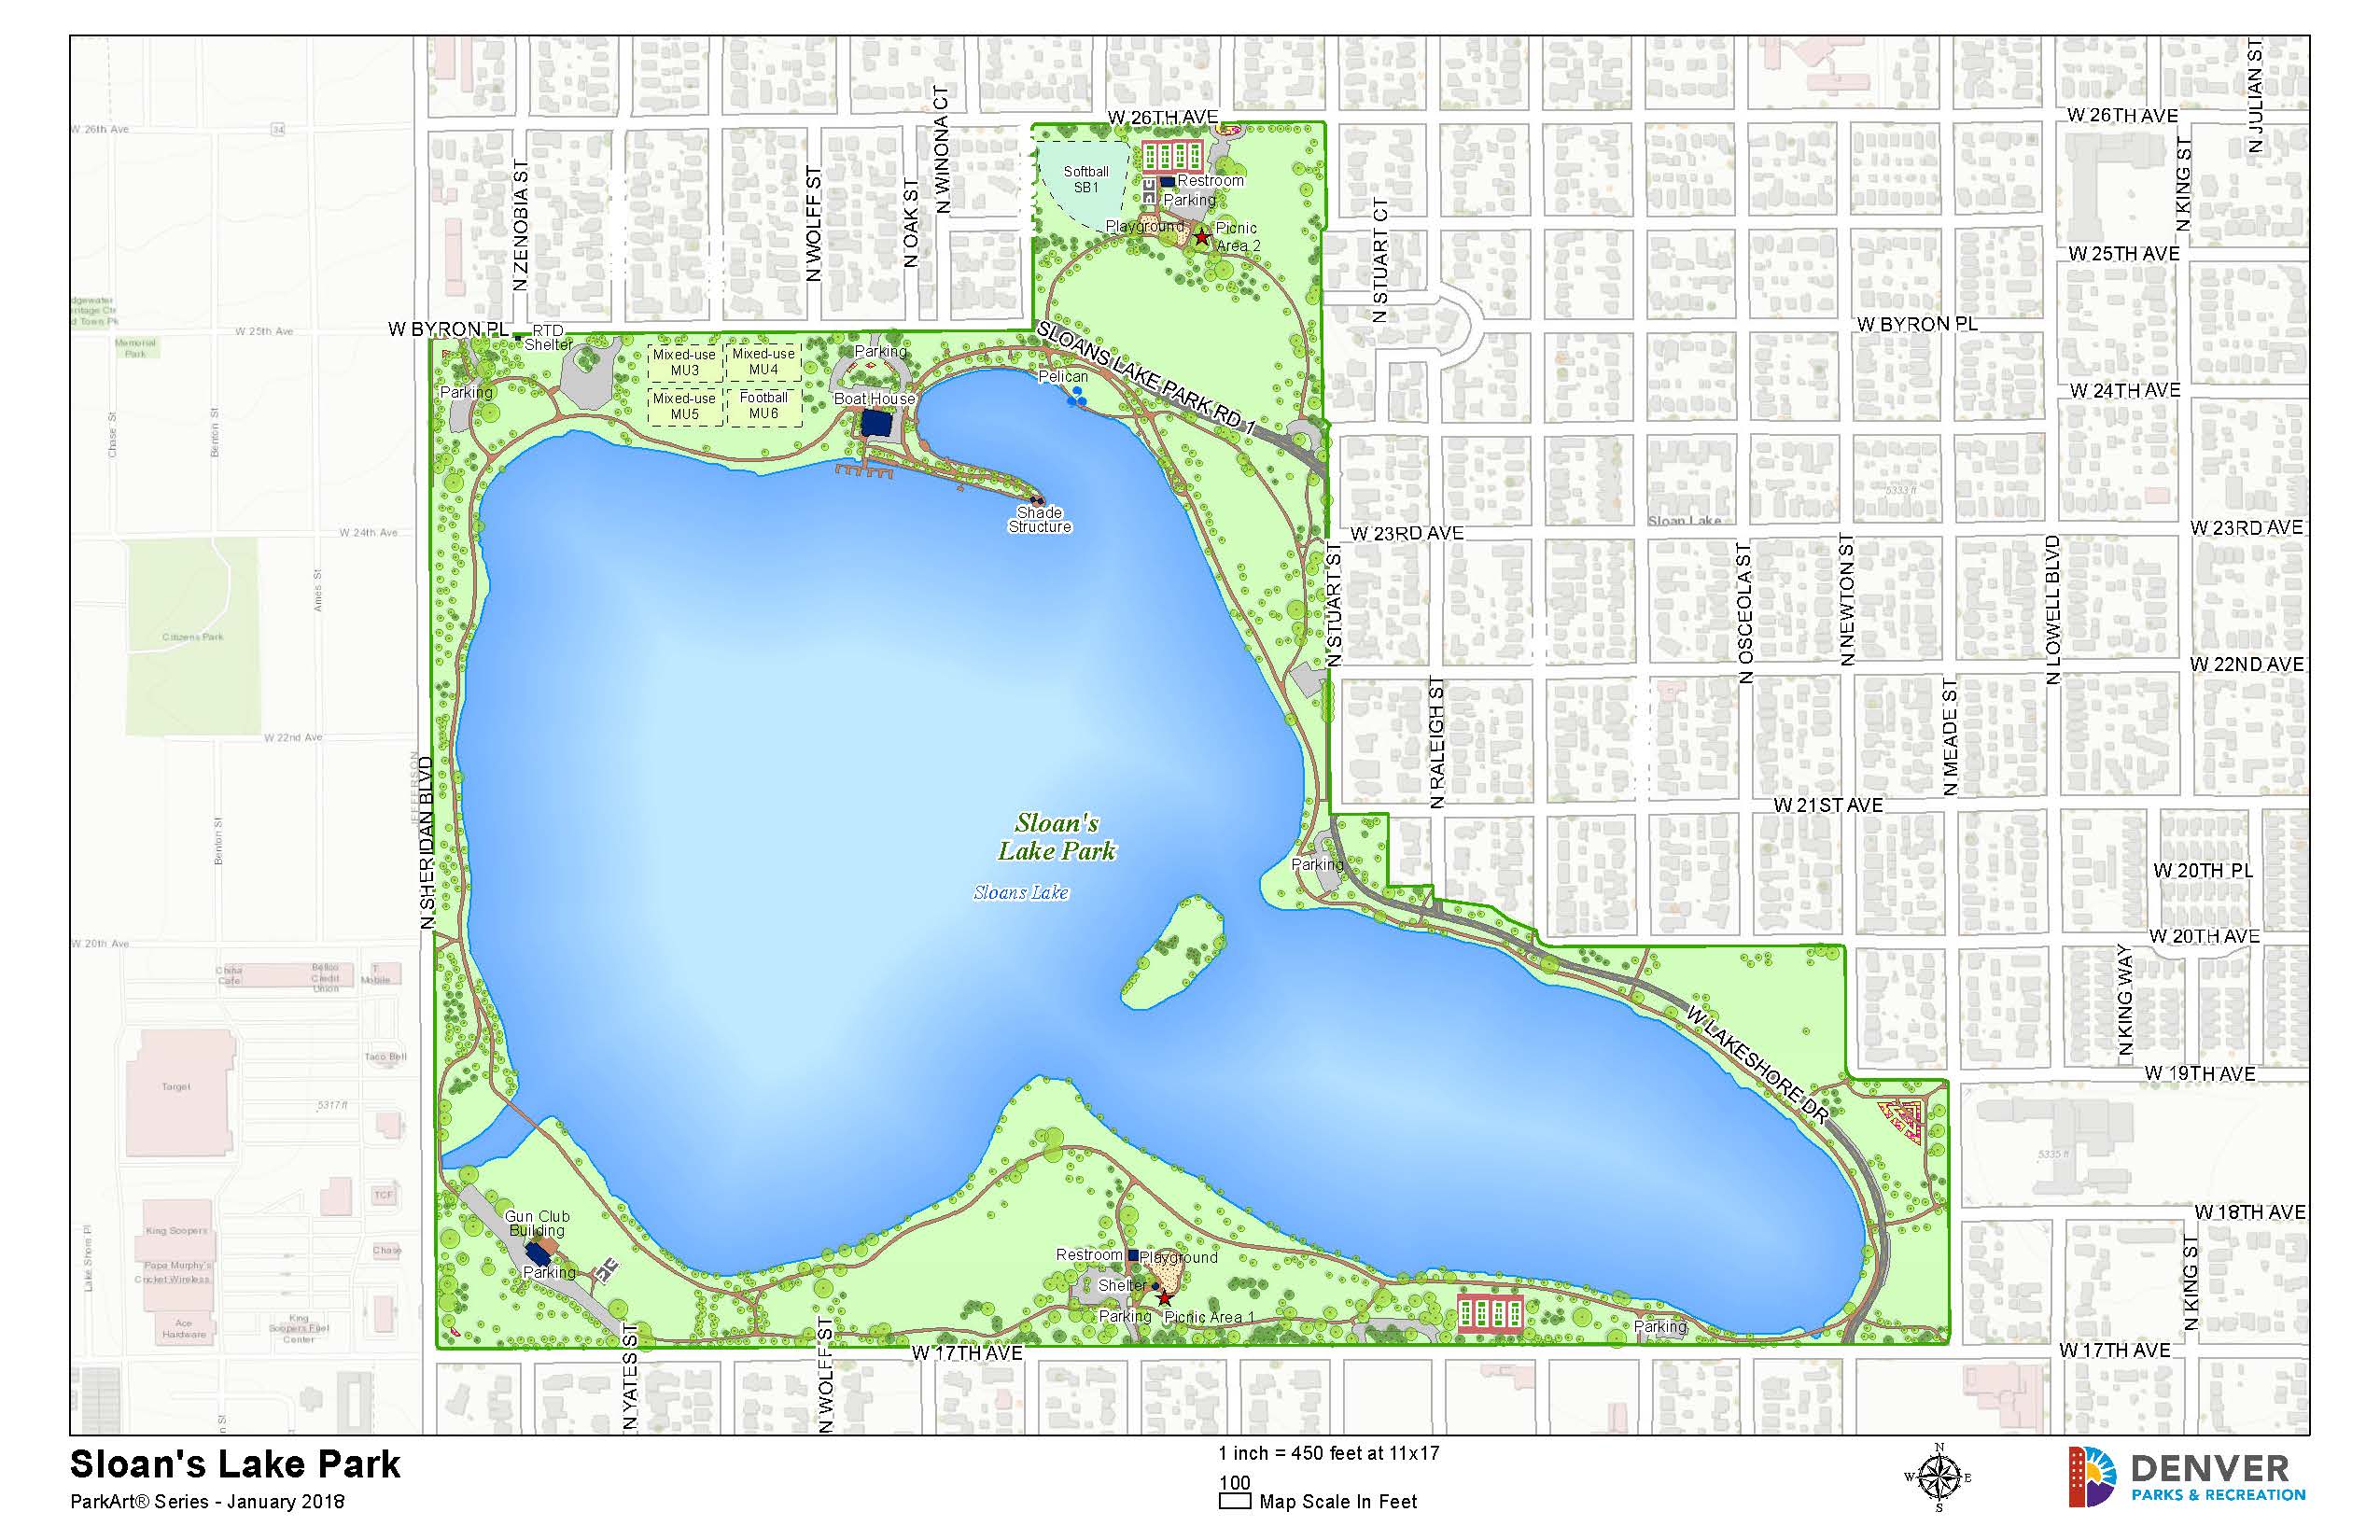 Last Day to Submit Qualifications for Sloan’s Lake Park Public Art Project